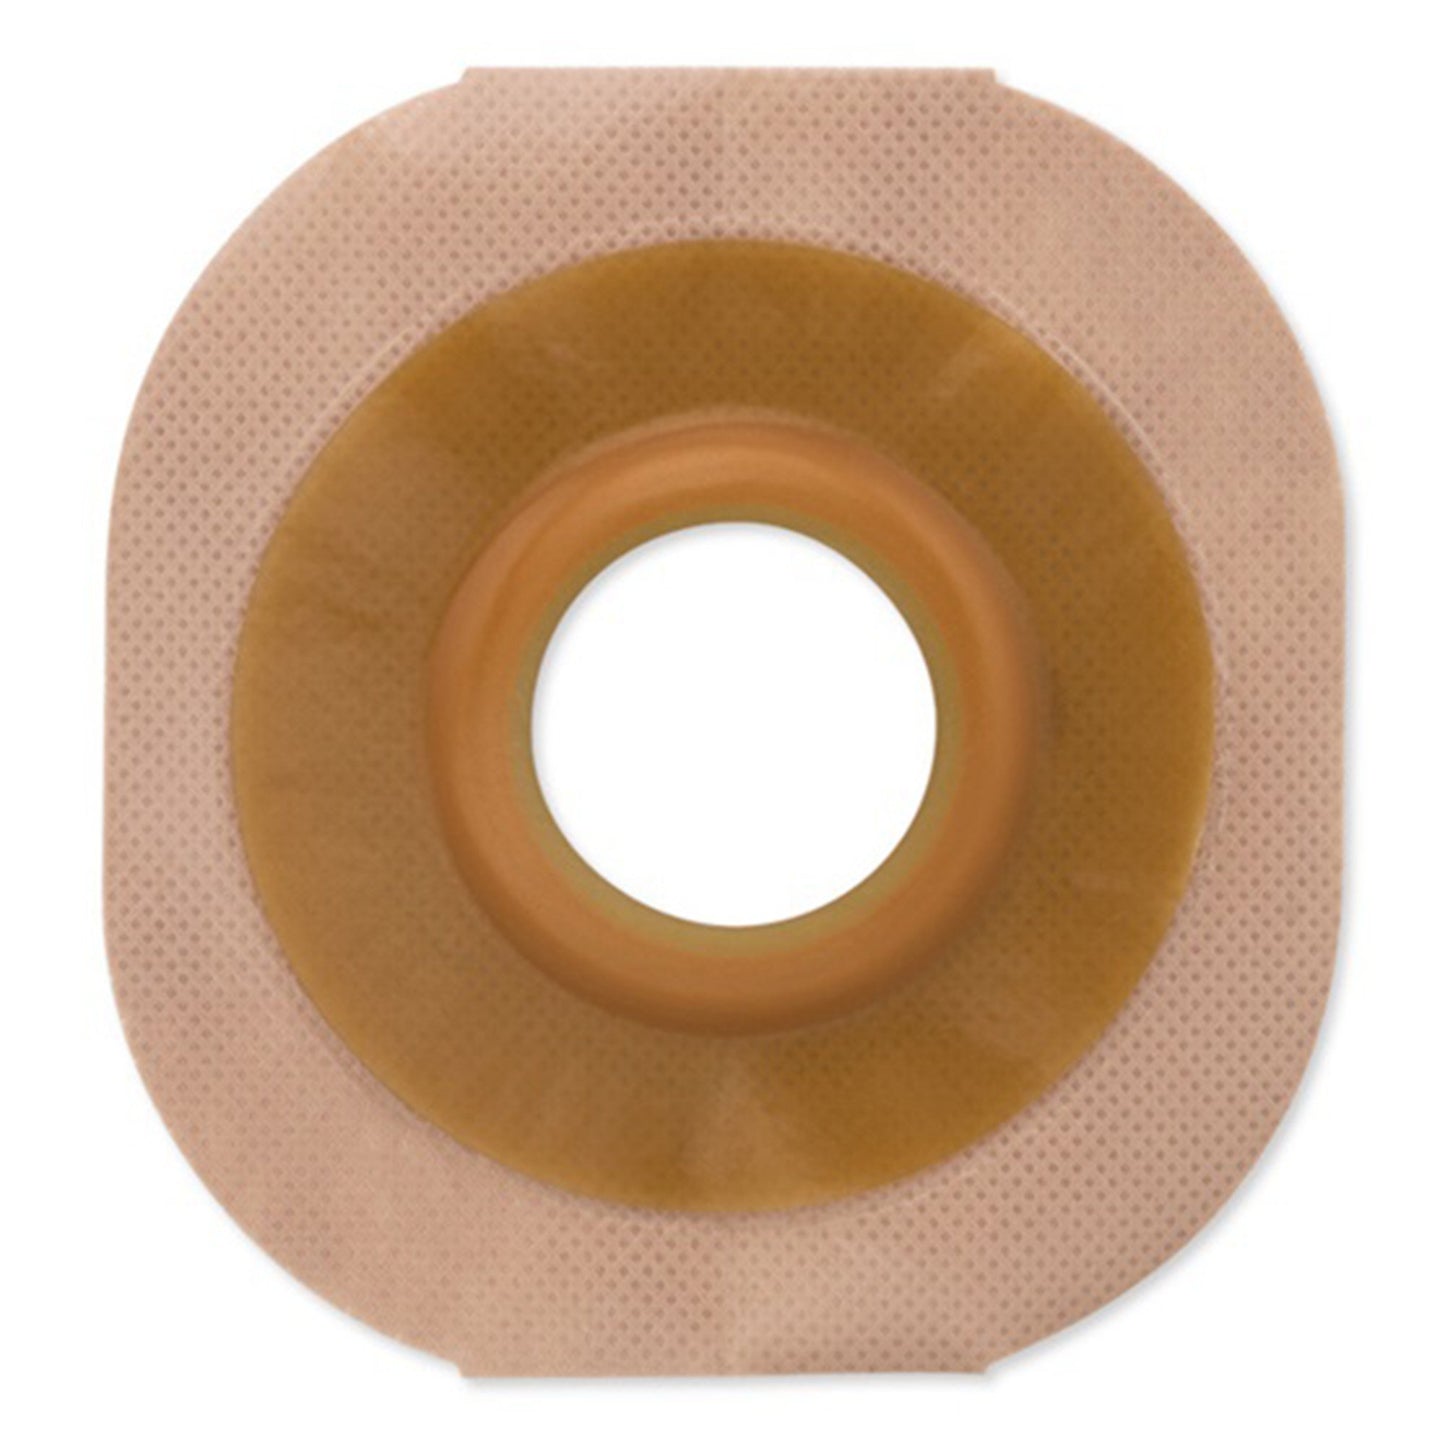 New Image™ Flextend™ Skin Barrier With Up to 2 Inch Stoma Opening, 5 ct